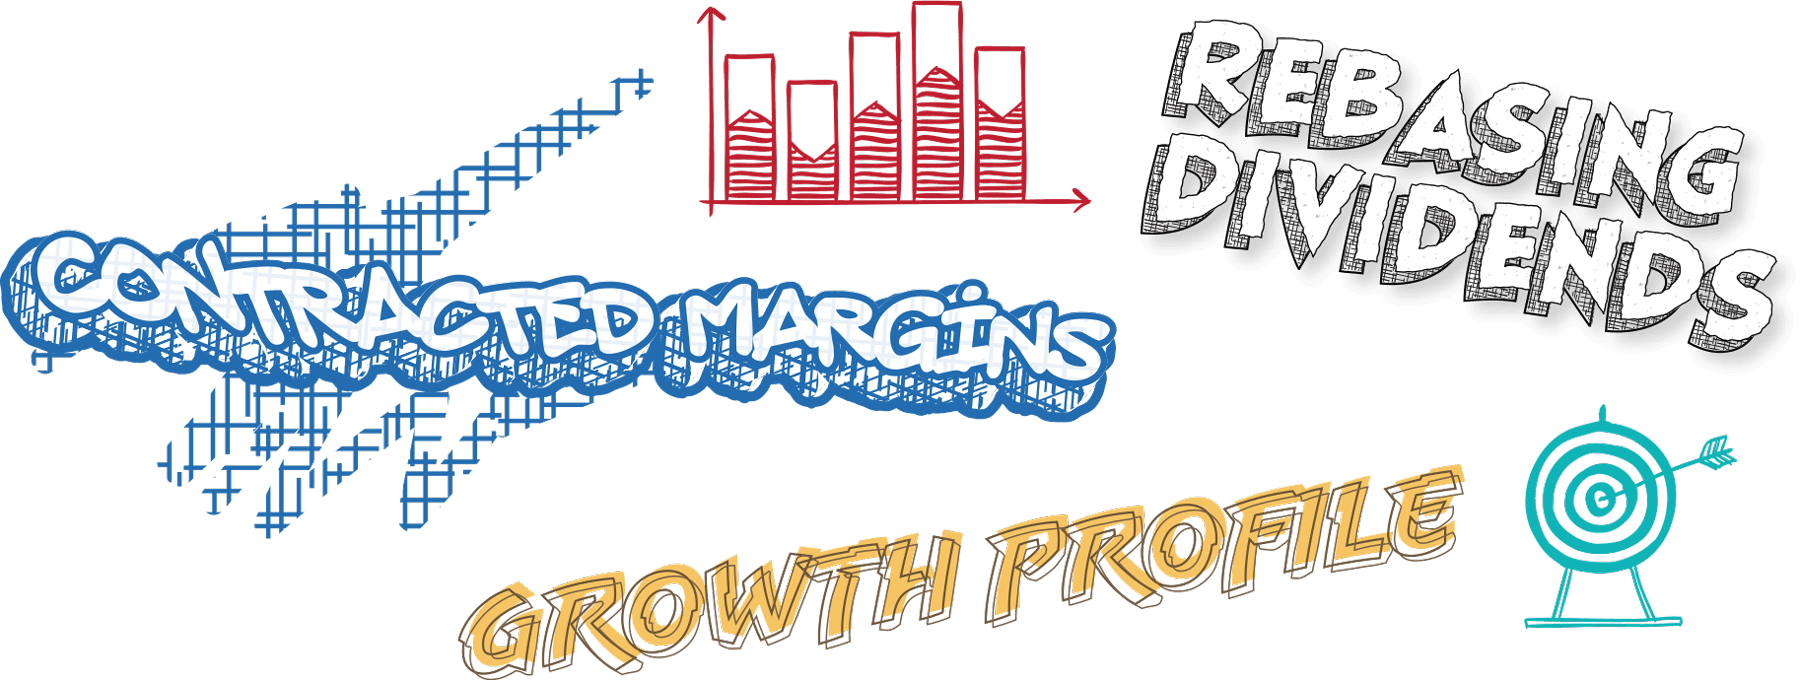 different typographic styles displaying the words contracted margins, growth profile, rebasing dividends, and clipart of a bar graph and target with an arrow in the moiddle